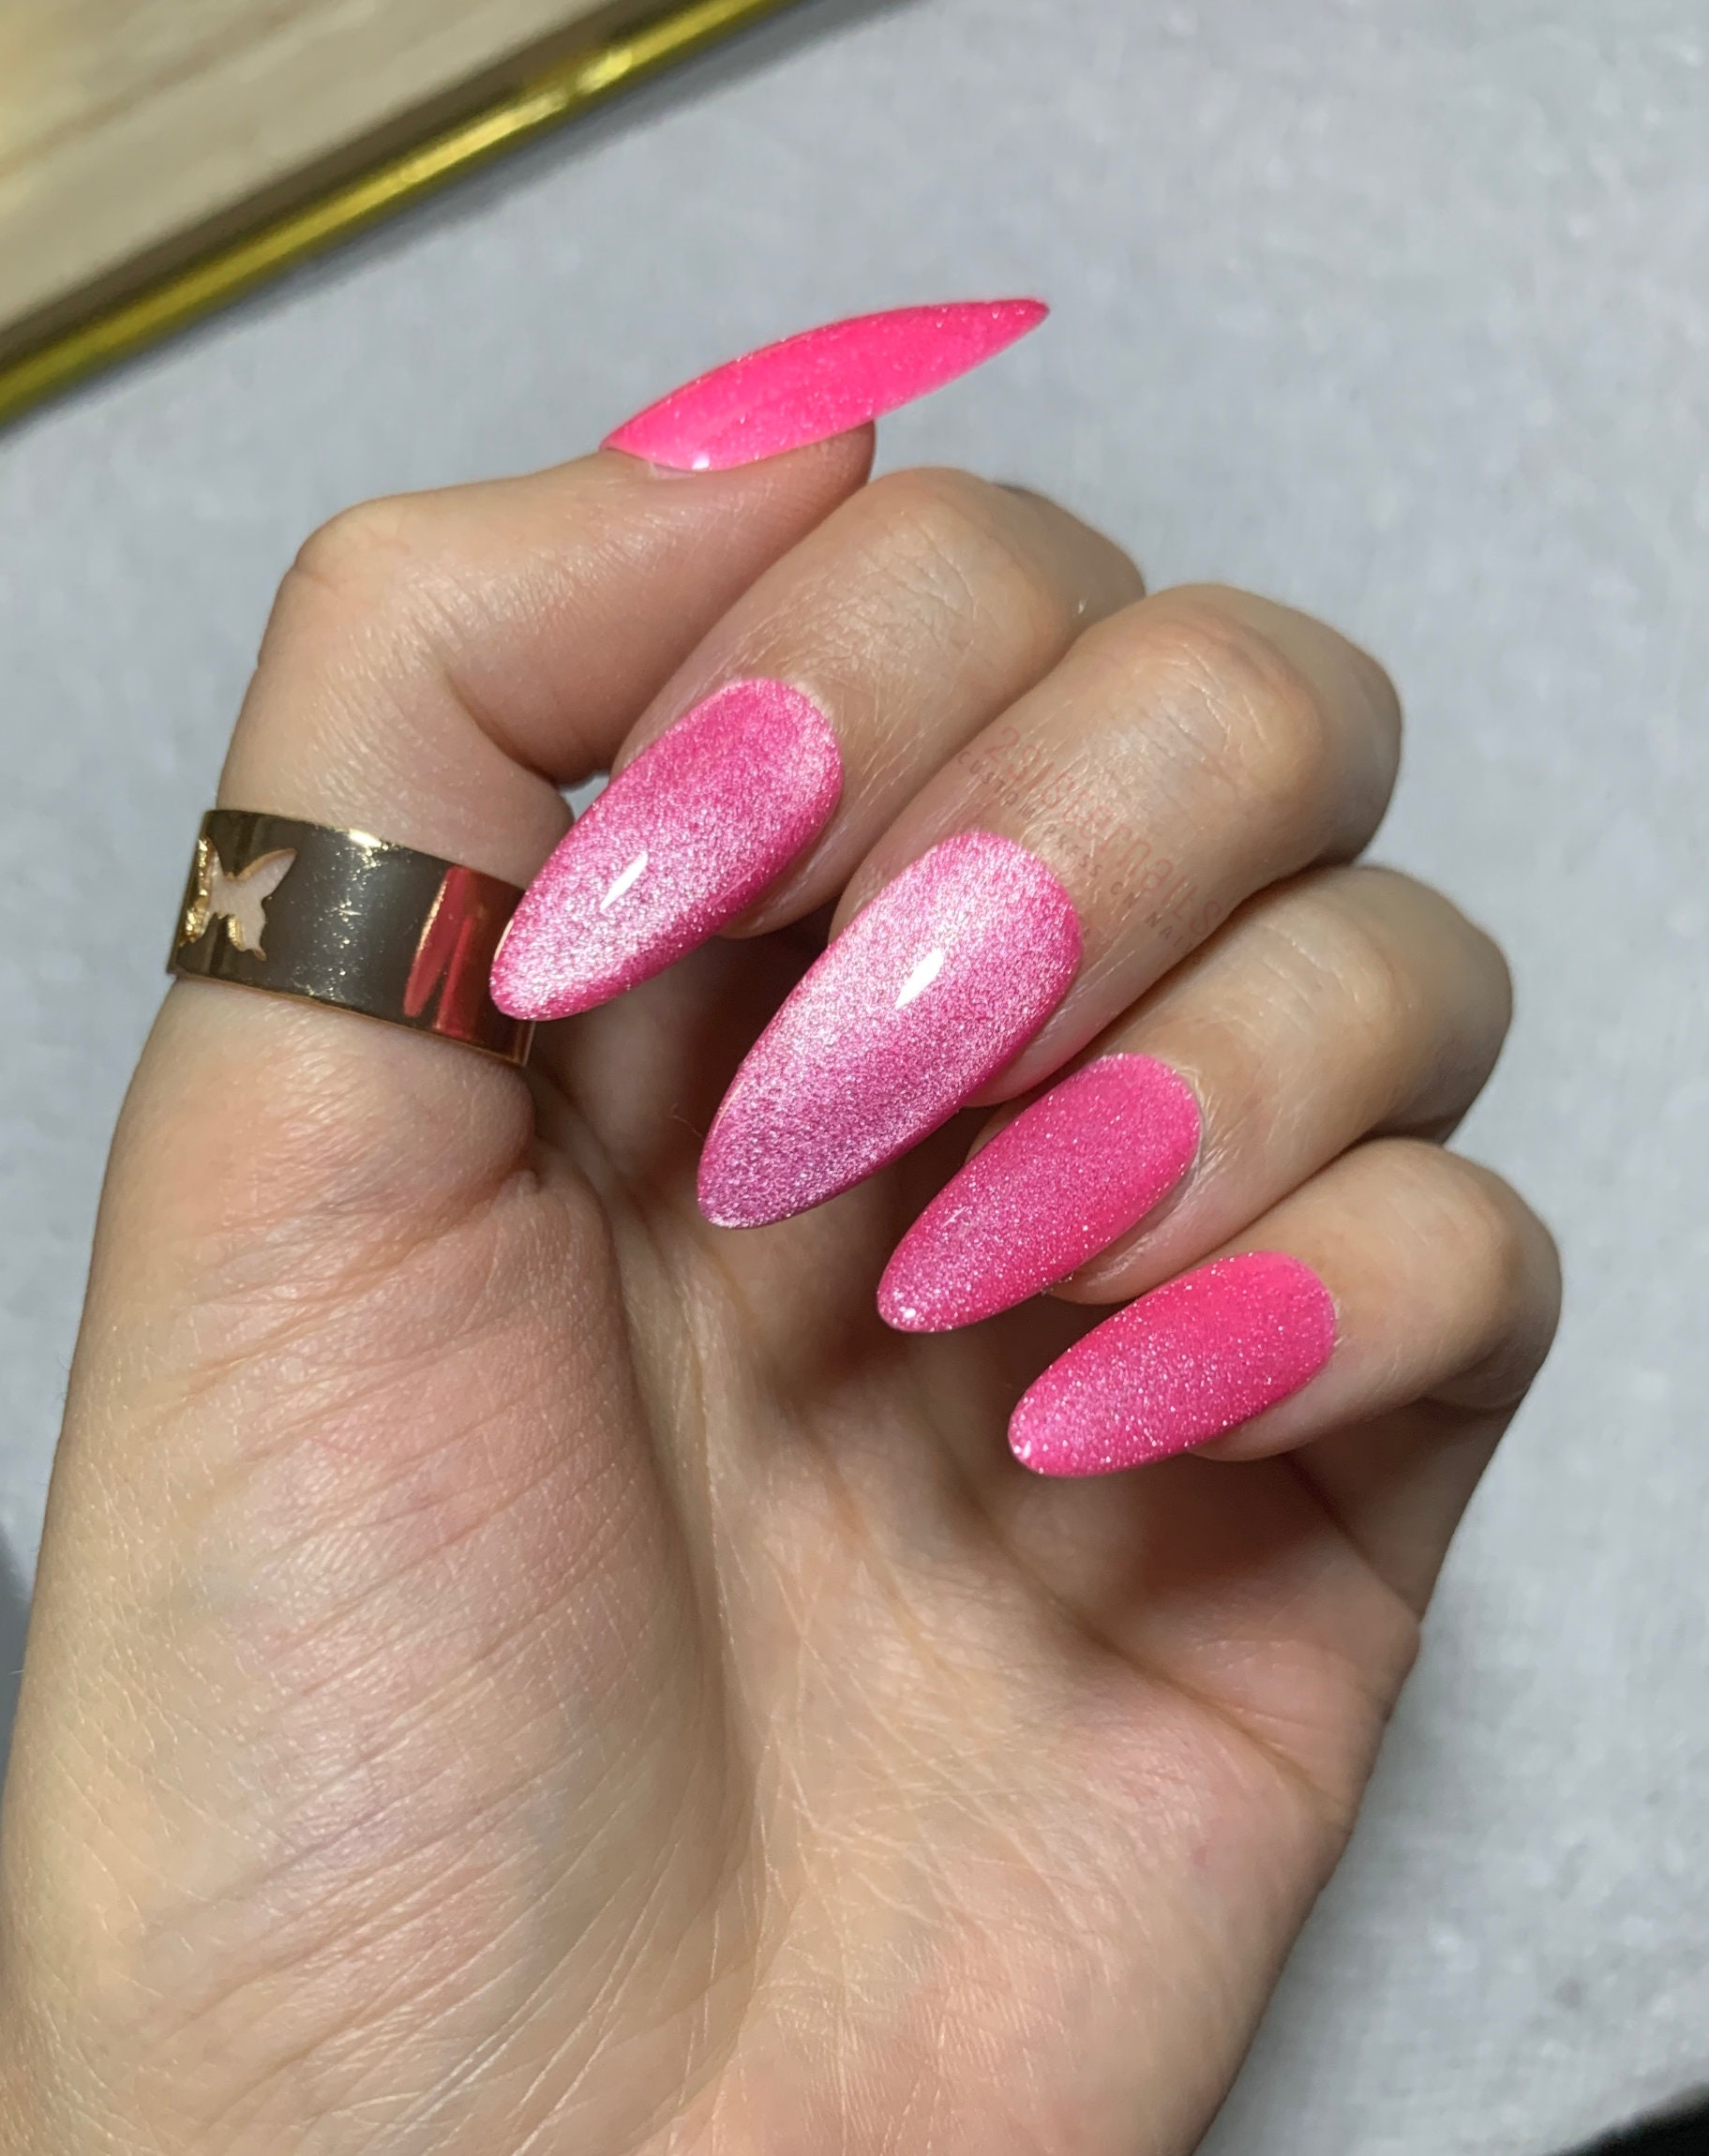 17 'Mean Girls' Manicure Ideas That Are So Fetch